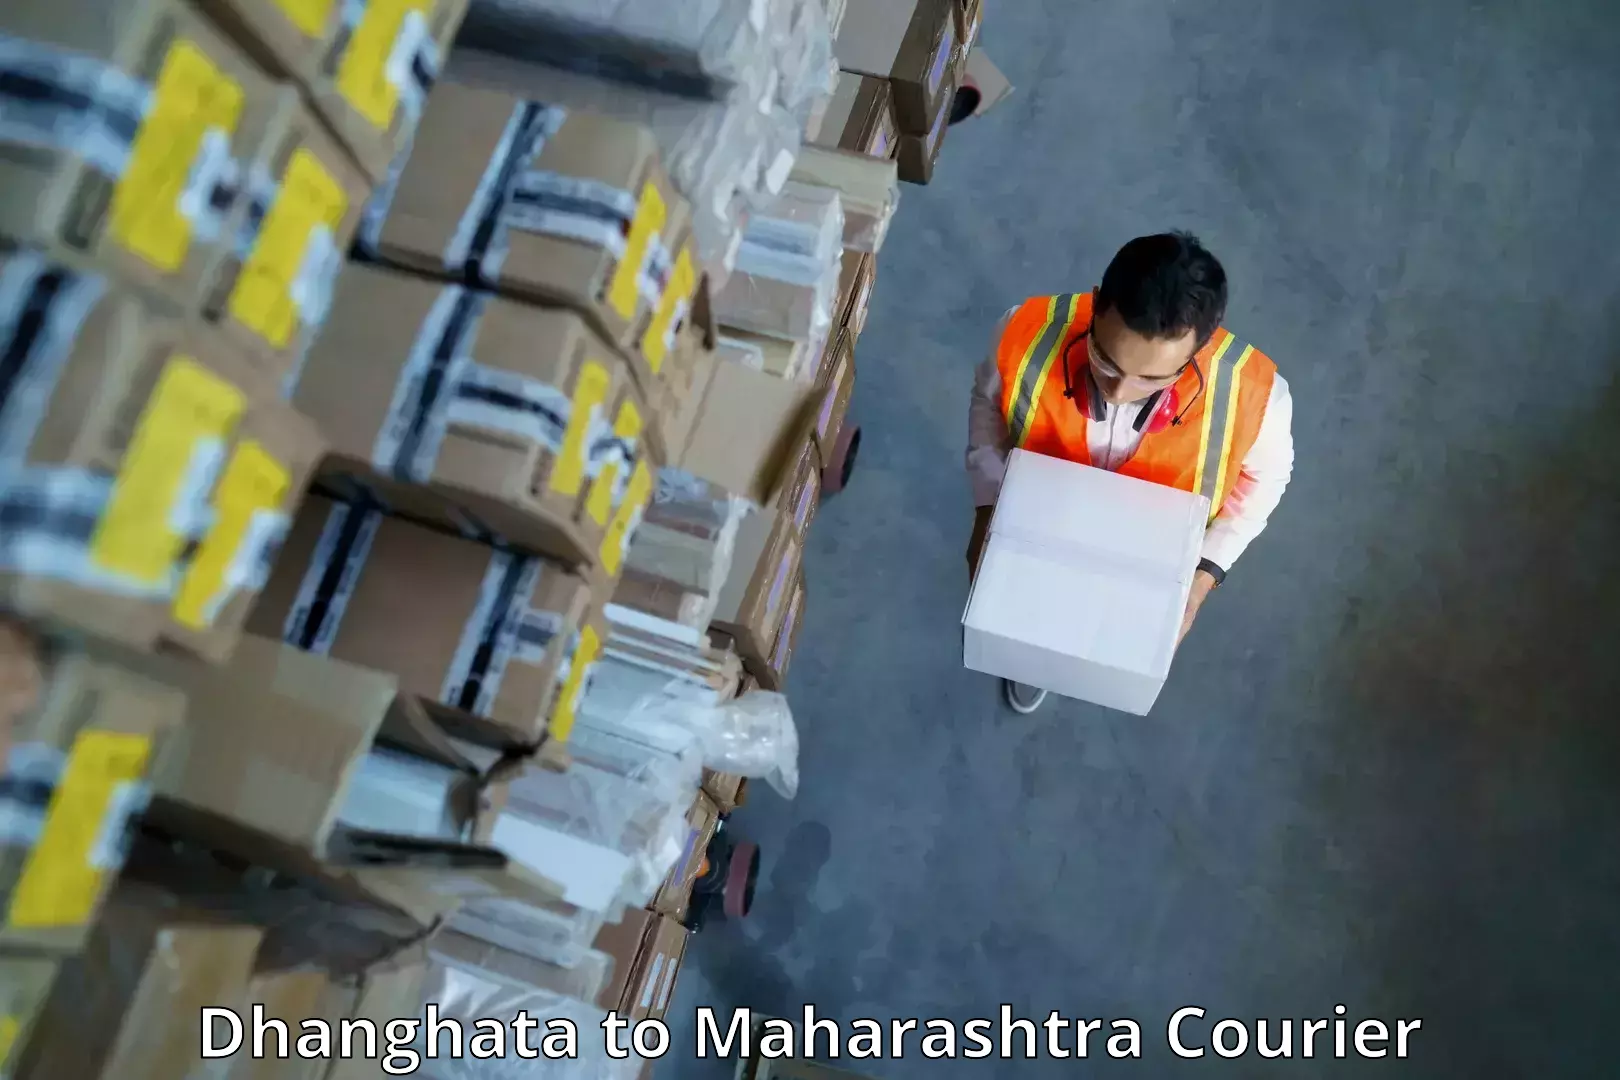 Urgent courier needs Dhanghata to Osmanabad